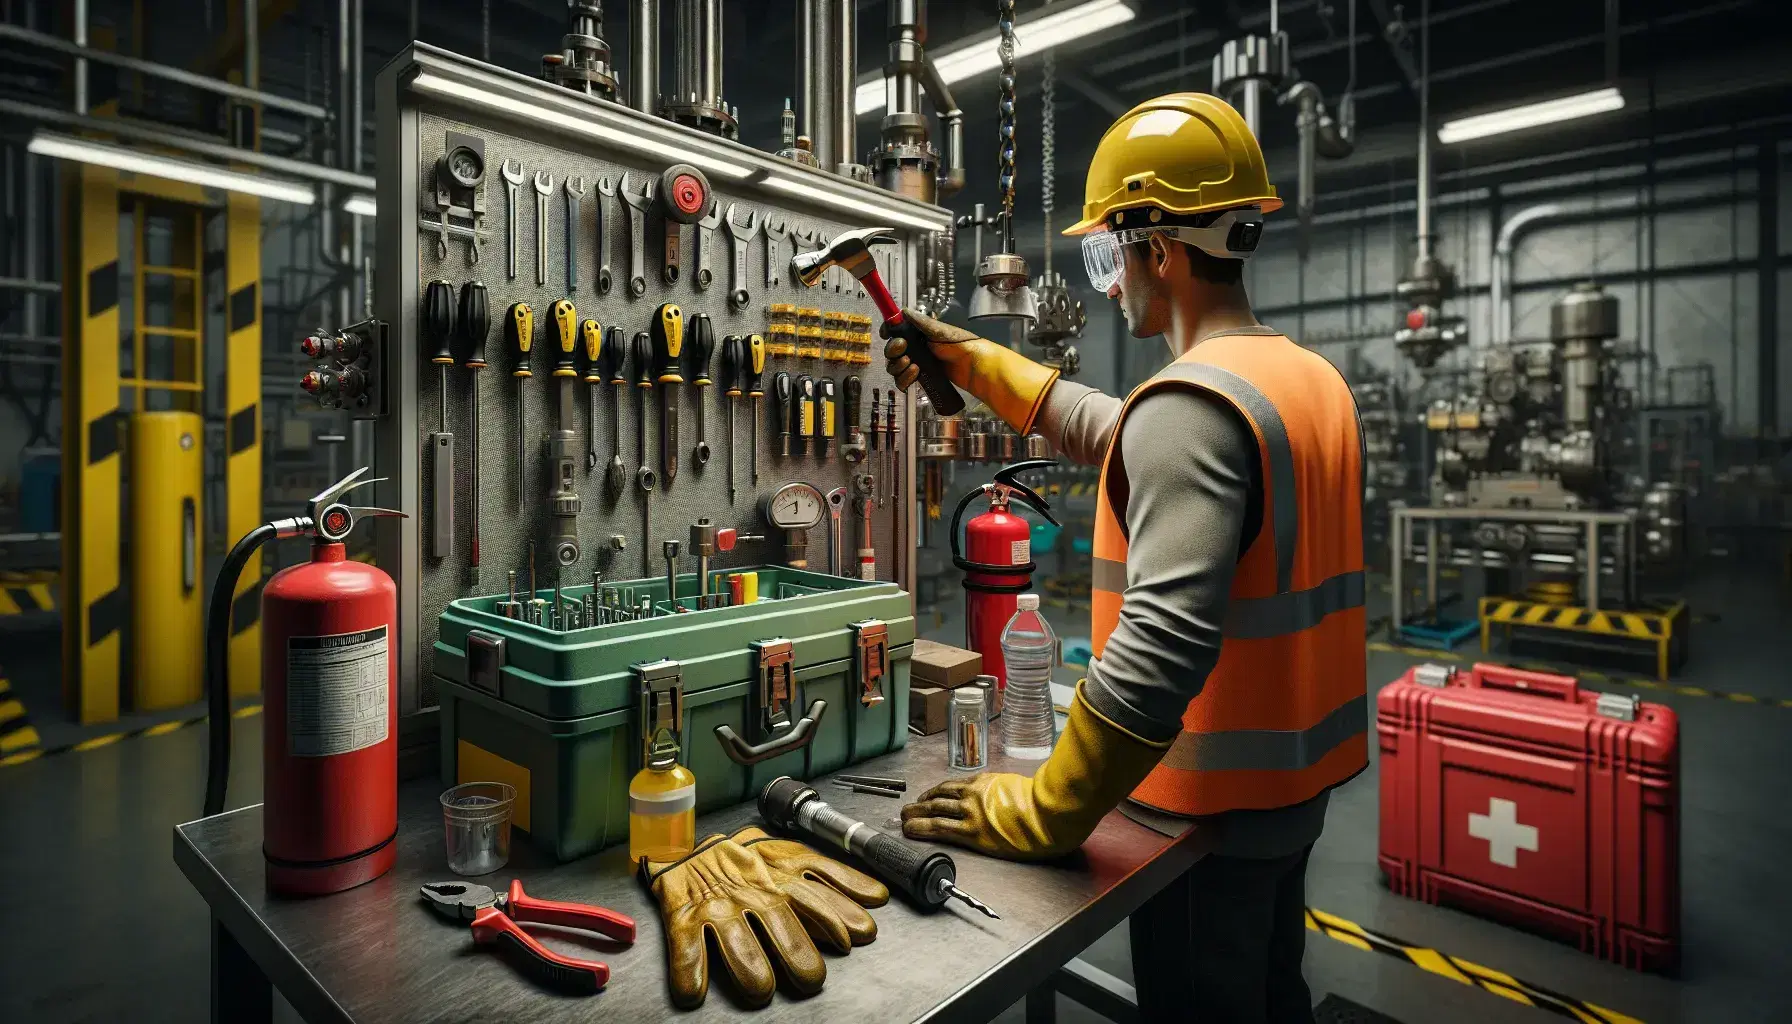 Worker in safety gear with power drill at industrial workbench, tools arranged, first aid kit and fire extinguisher on wall, marked safety pathway.